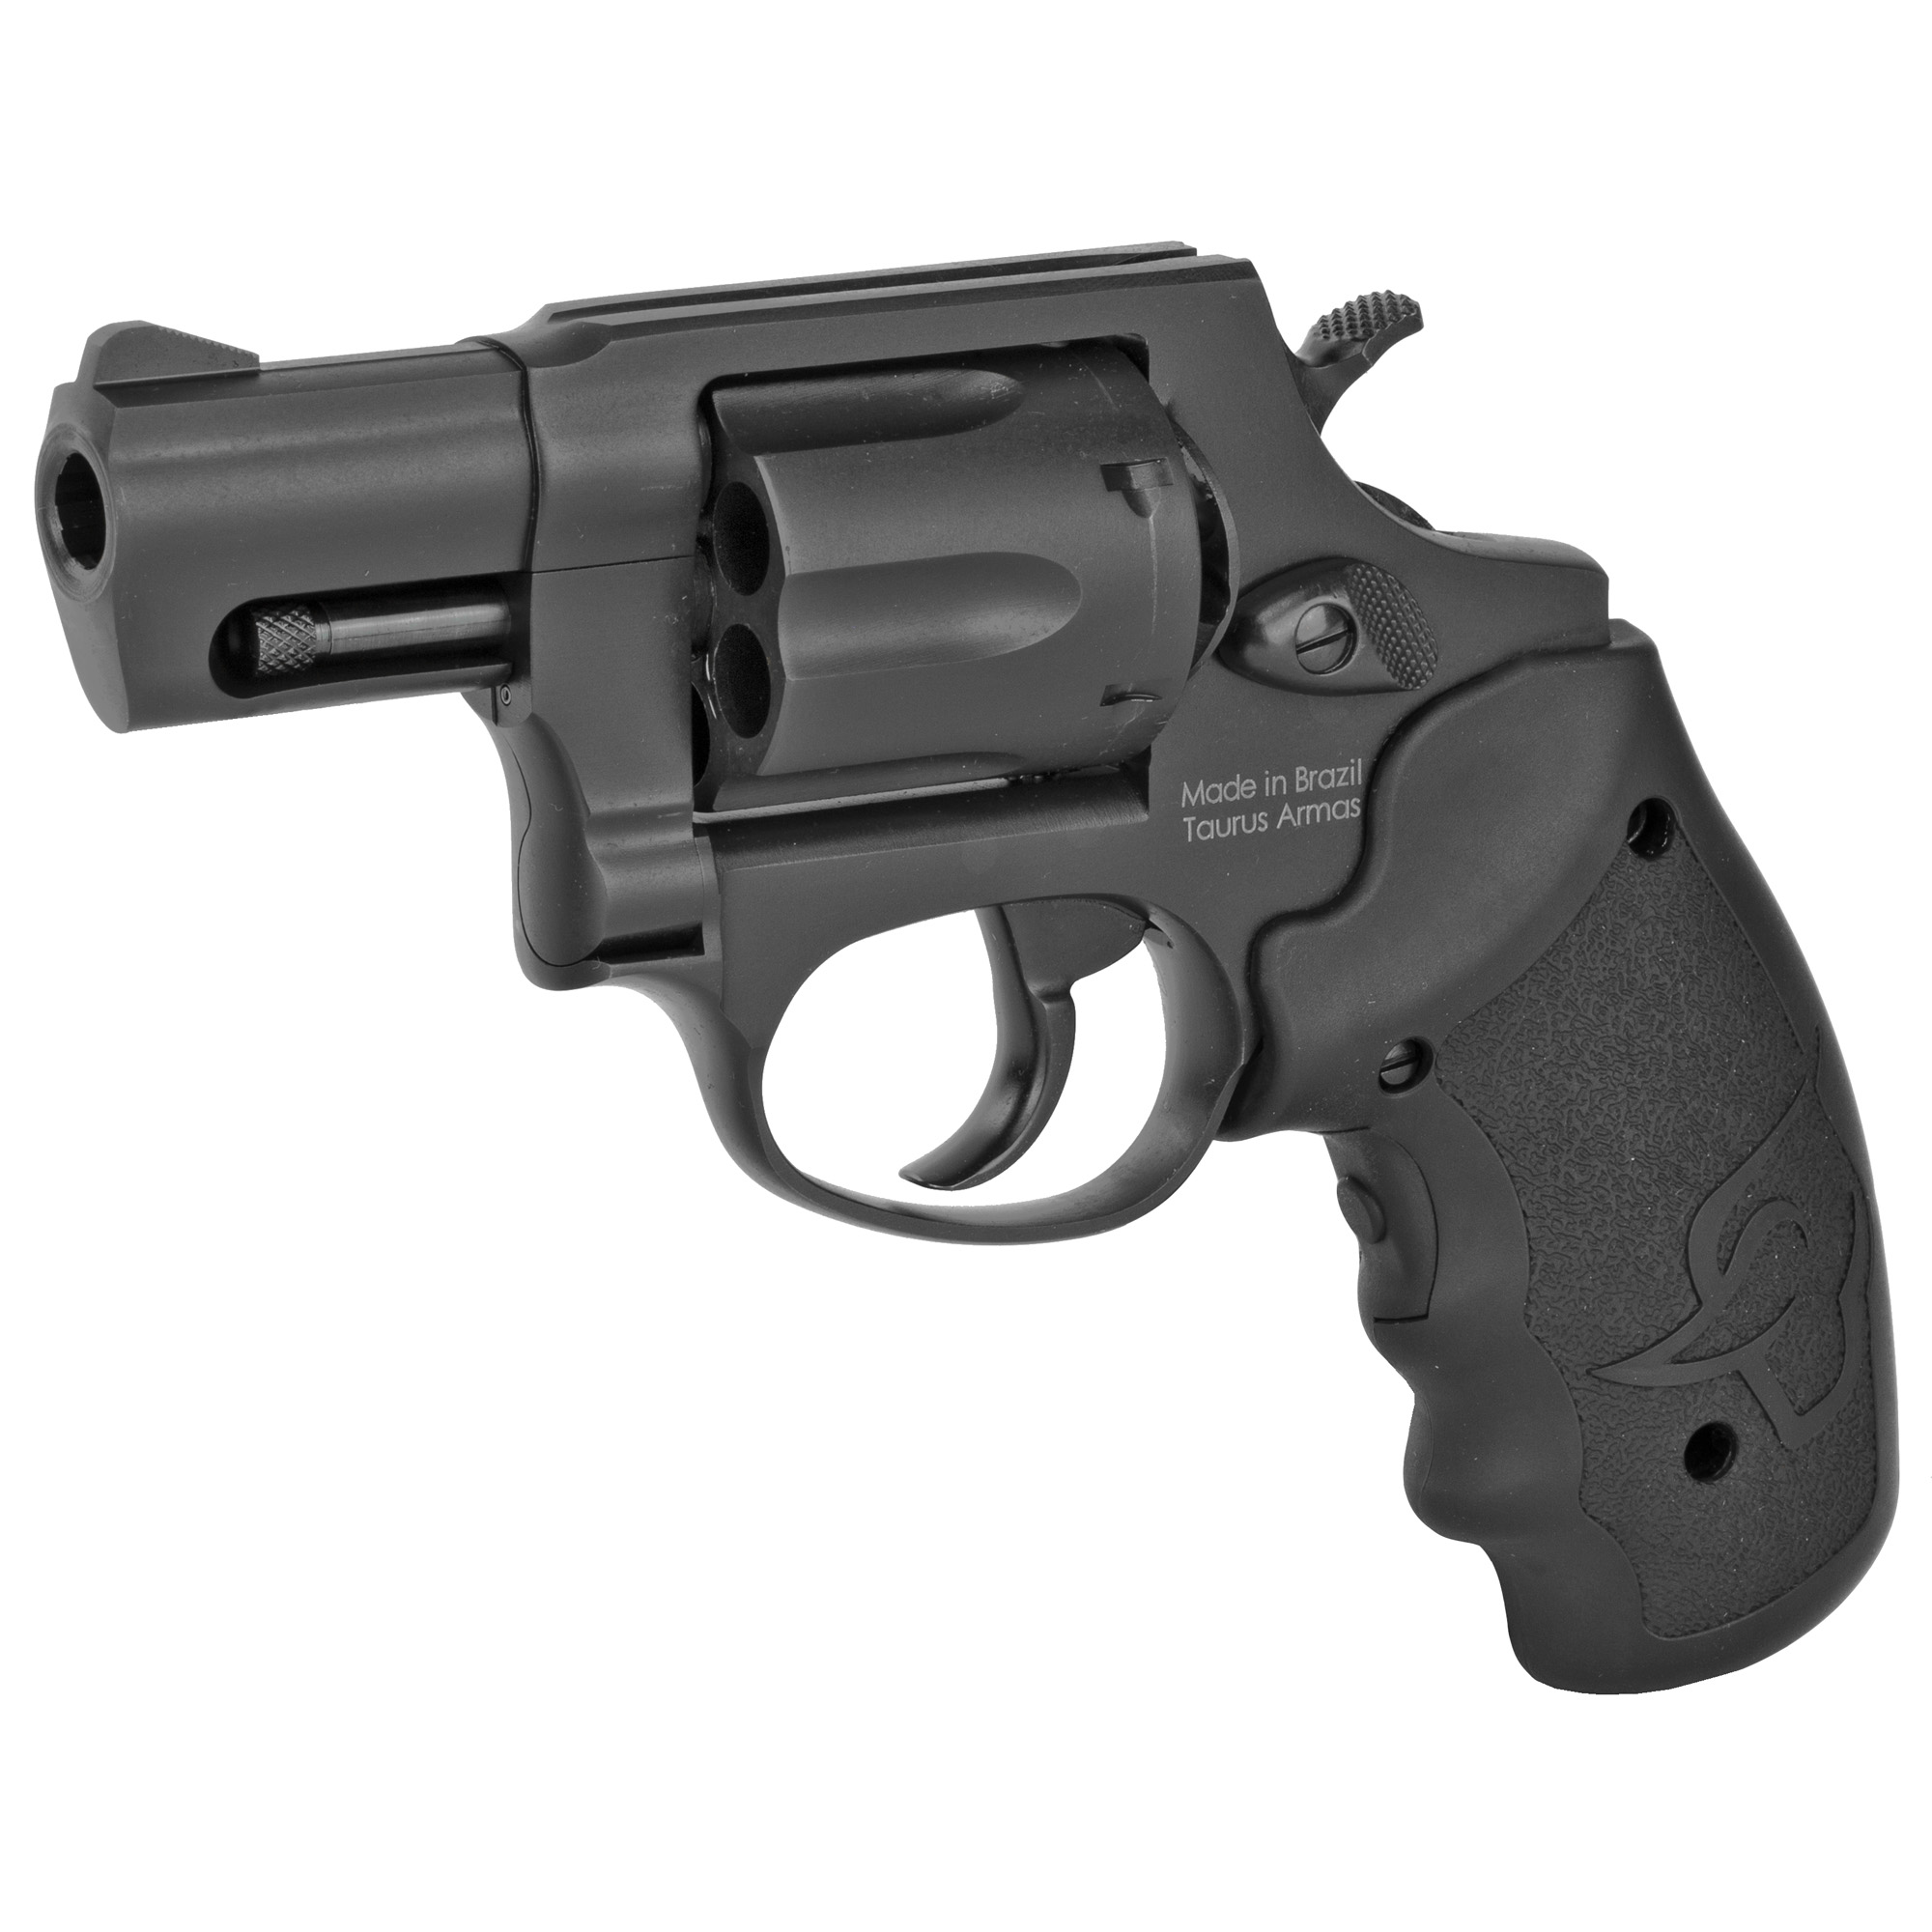 Taurus, Model 856VL, Double Action, Metal Frame Revolver, Small Frame, 38 Special, 2" Barrel, Steel, Matte Finish, Black, Viridian Red Laser Grip, Fixed Sights, 6 Rounds